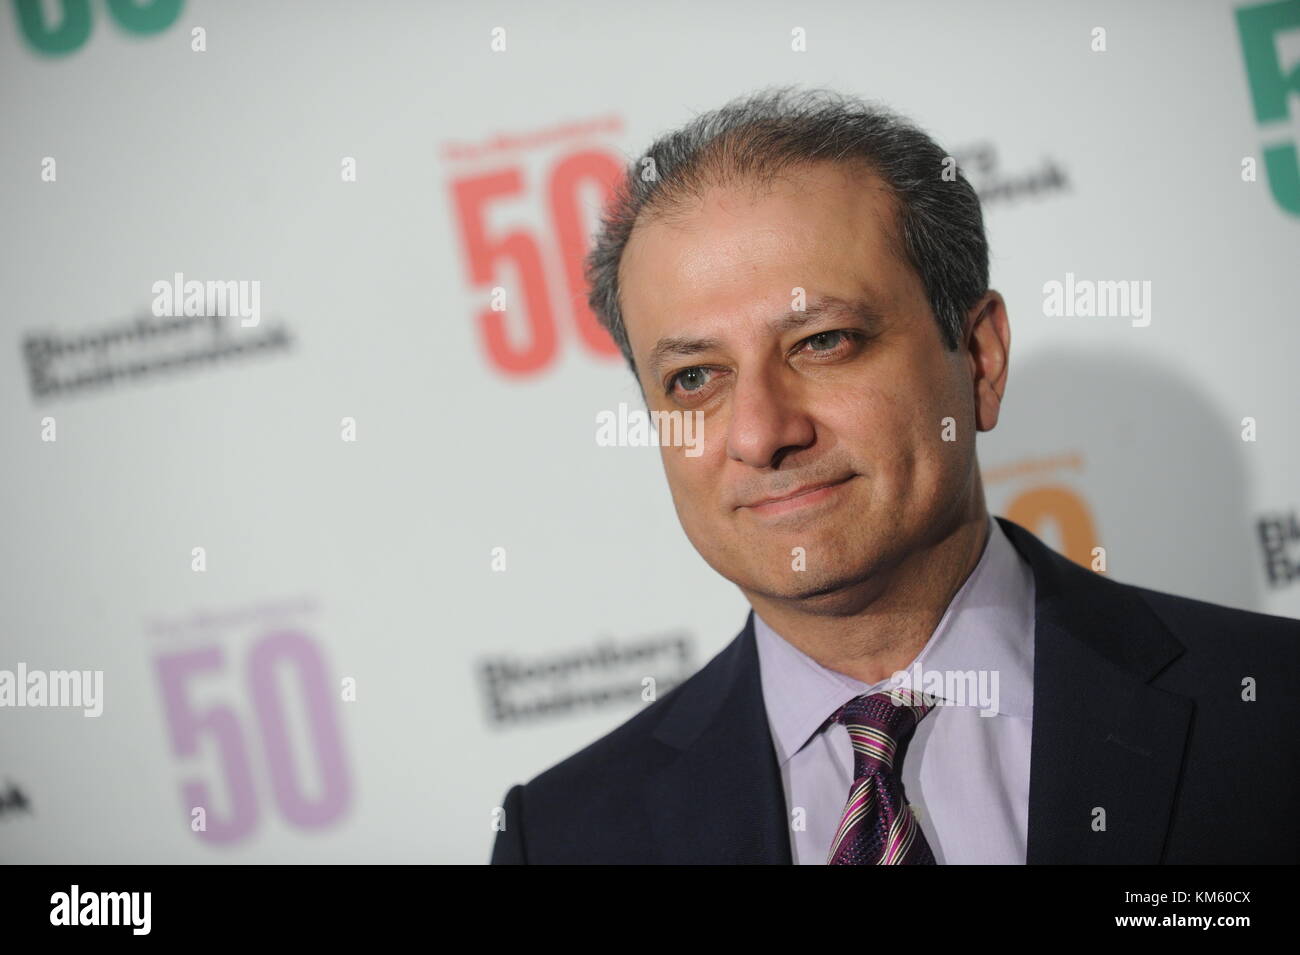 New York, USA. 4th December, 2017. Preet Bharara attends 'The Bloomberg 50' celebration at Gotham Hall on December 4, 2017 in New York City. People: Preet Bharara Credit: Storms Media Group/Alamy Live News Stock Photo